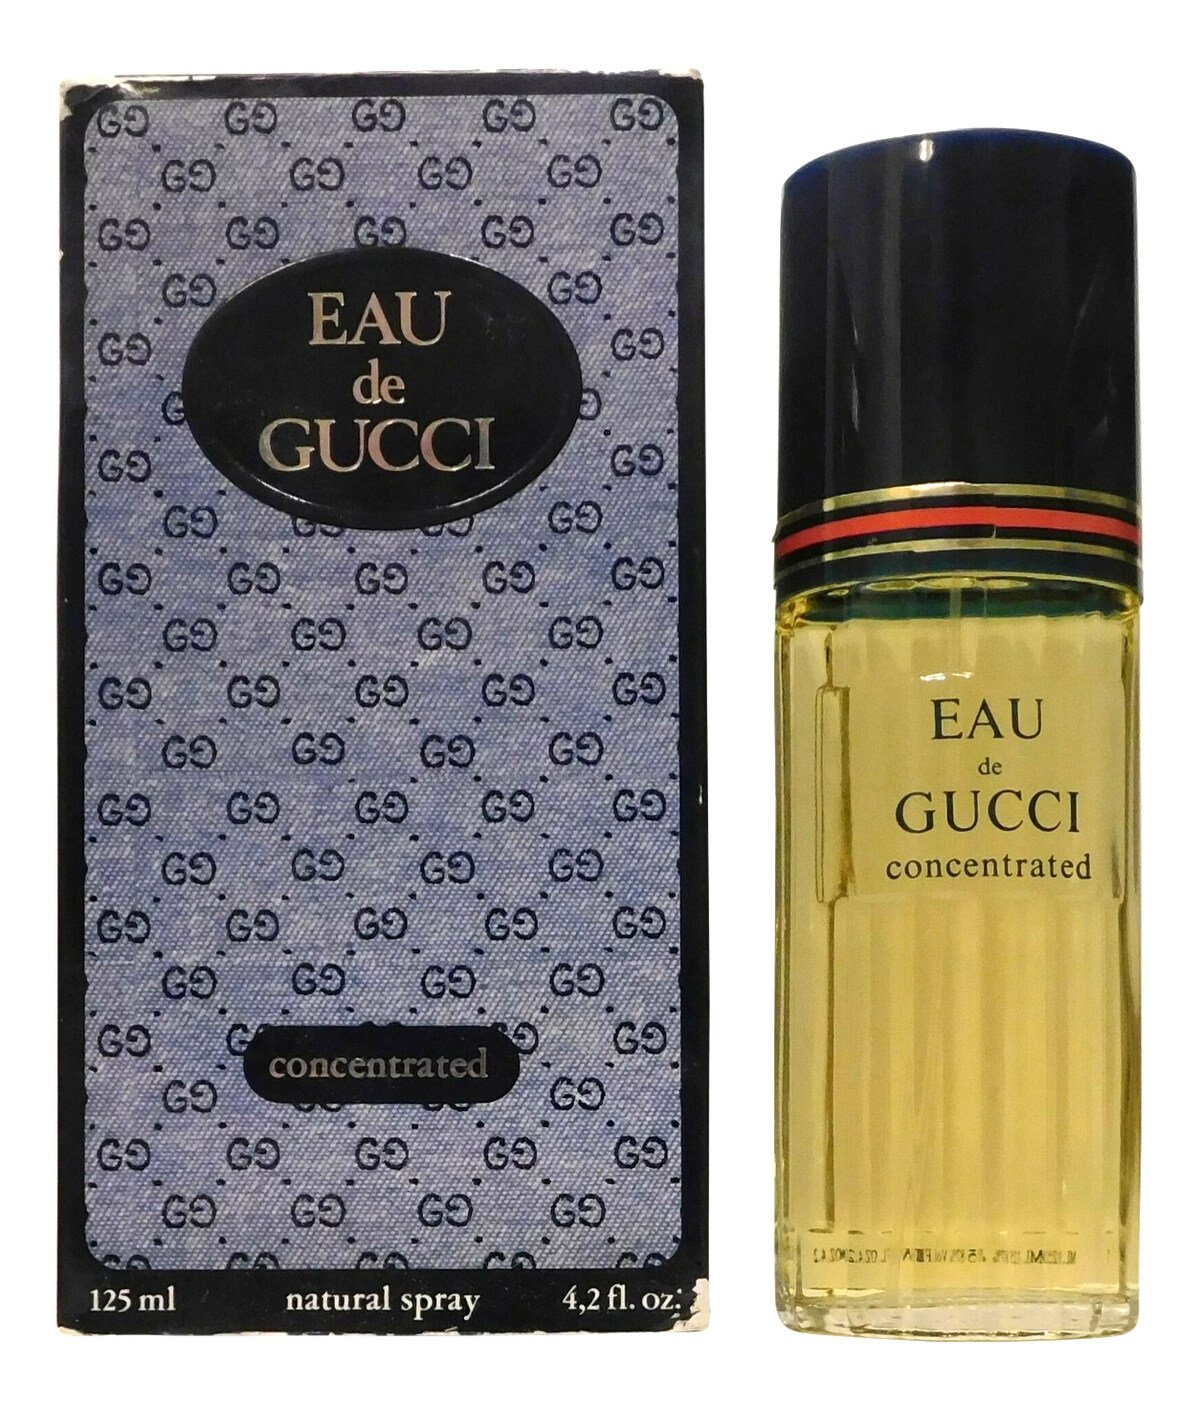 Eau de Gucci Concentrée / Eau de Gucci Concentrated by Gucci